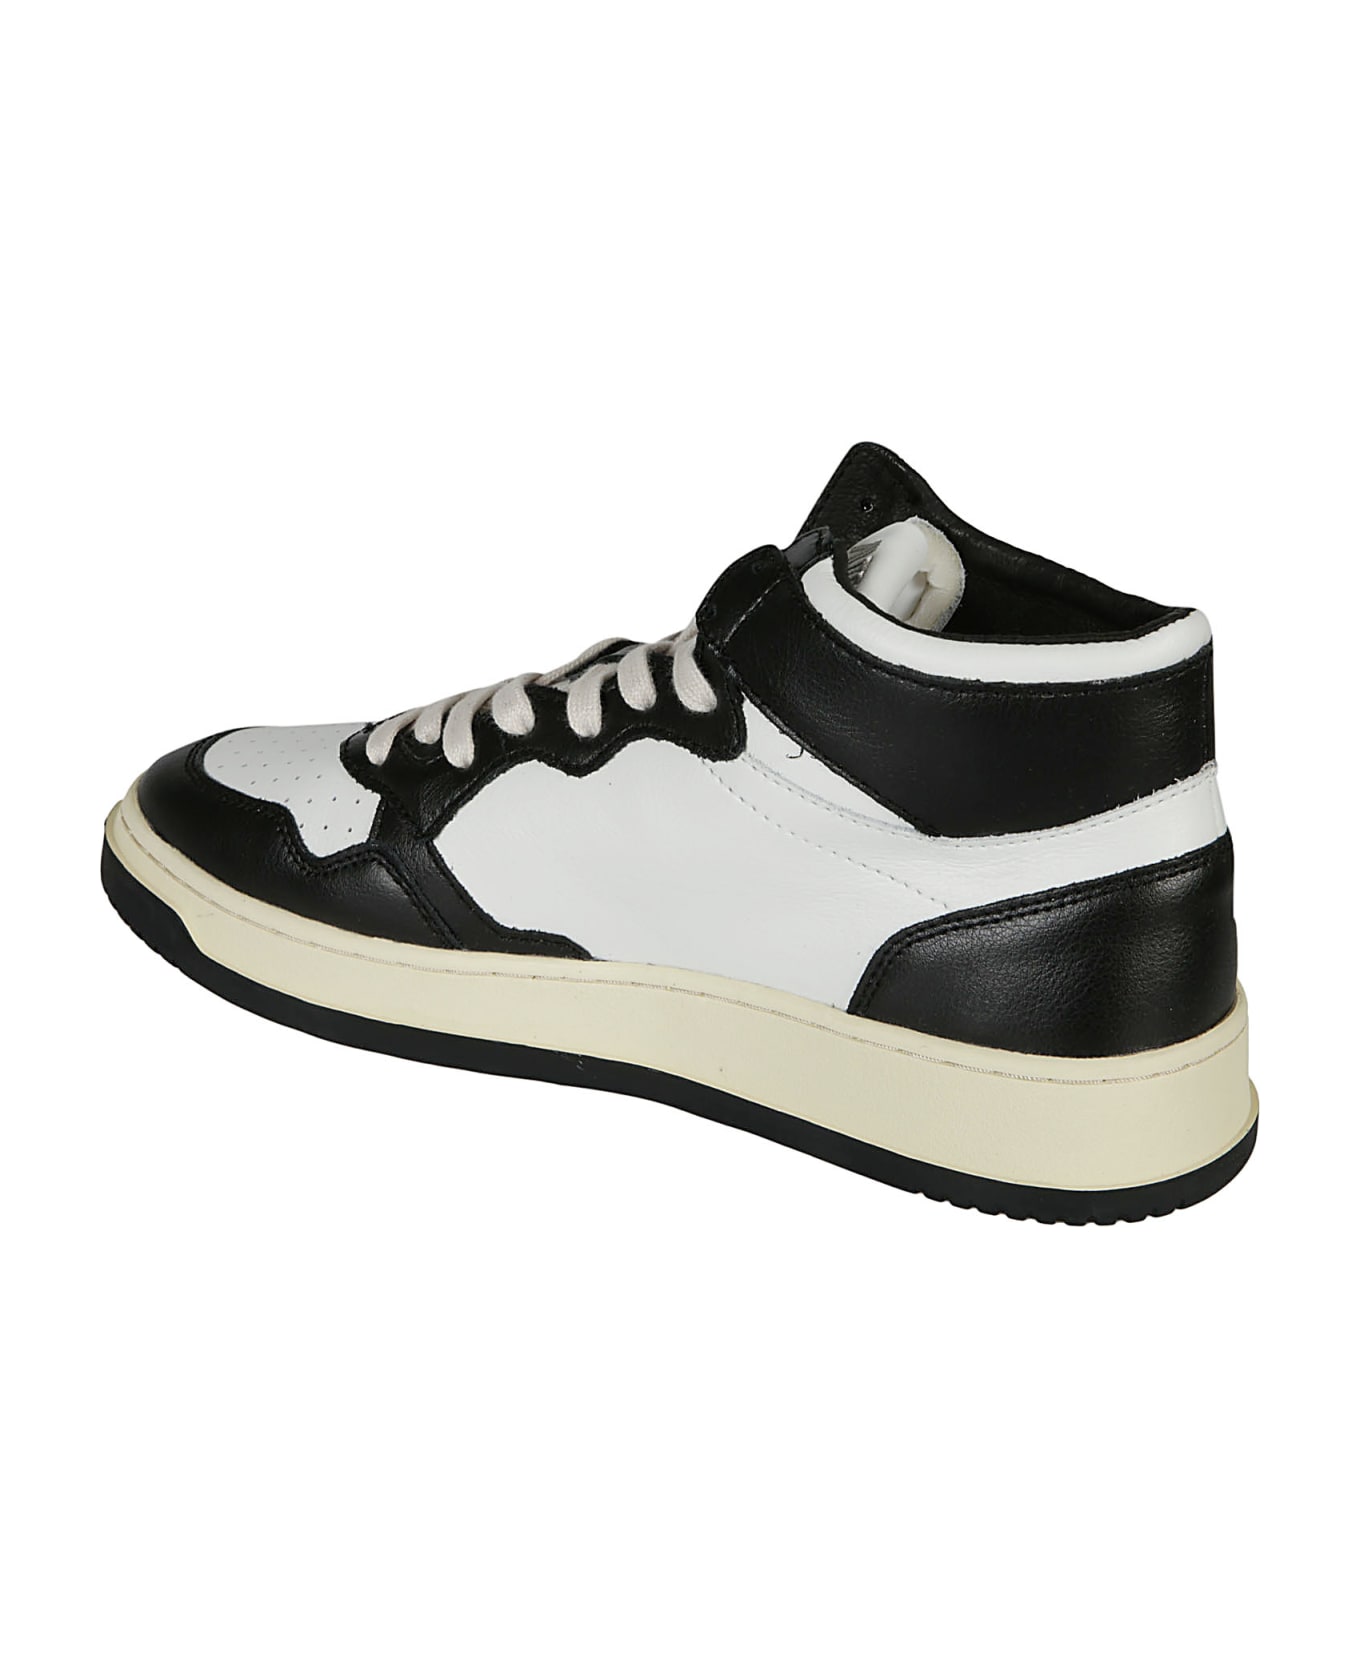 Autry Medalist Mid Leather Sneakers - Leat wht/bk